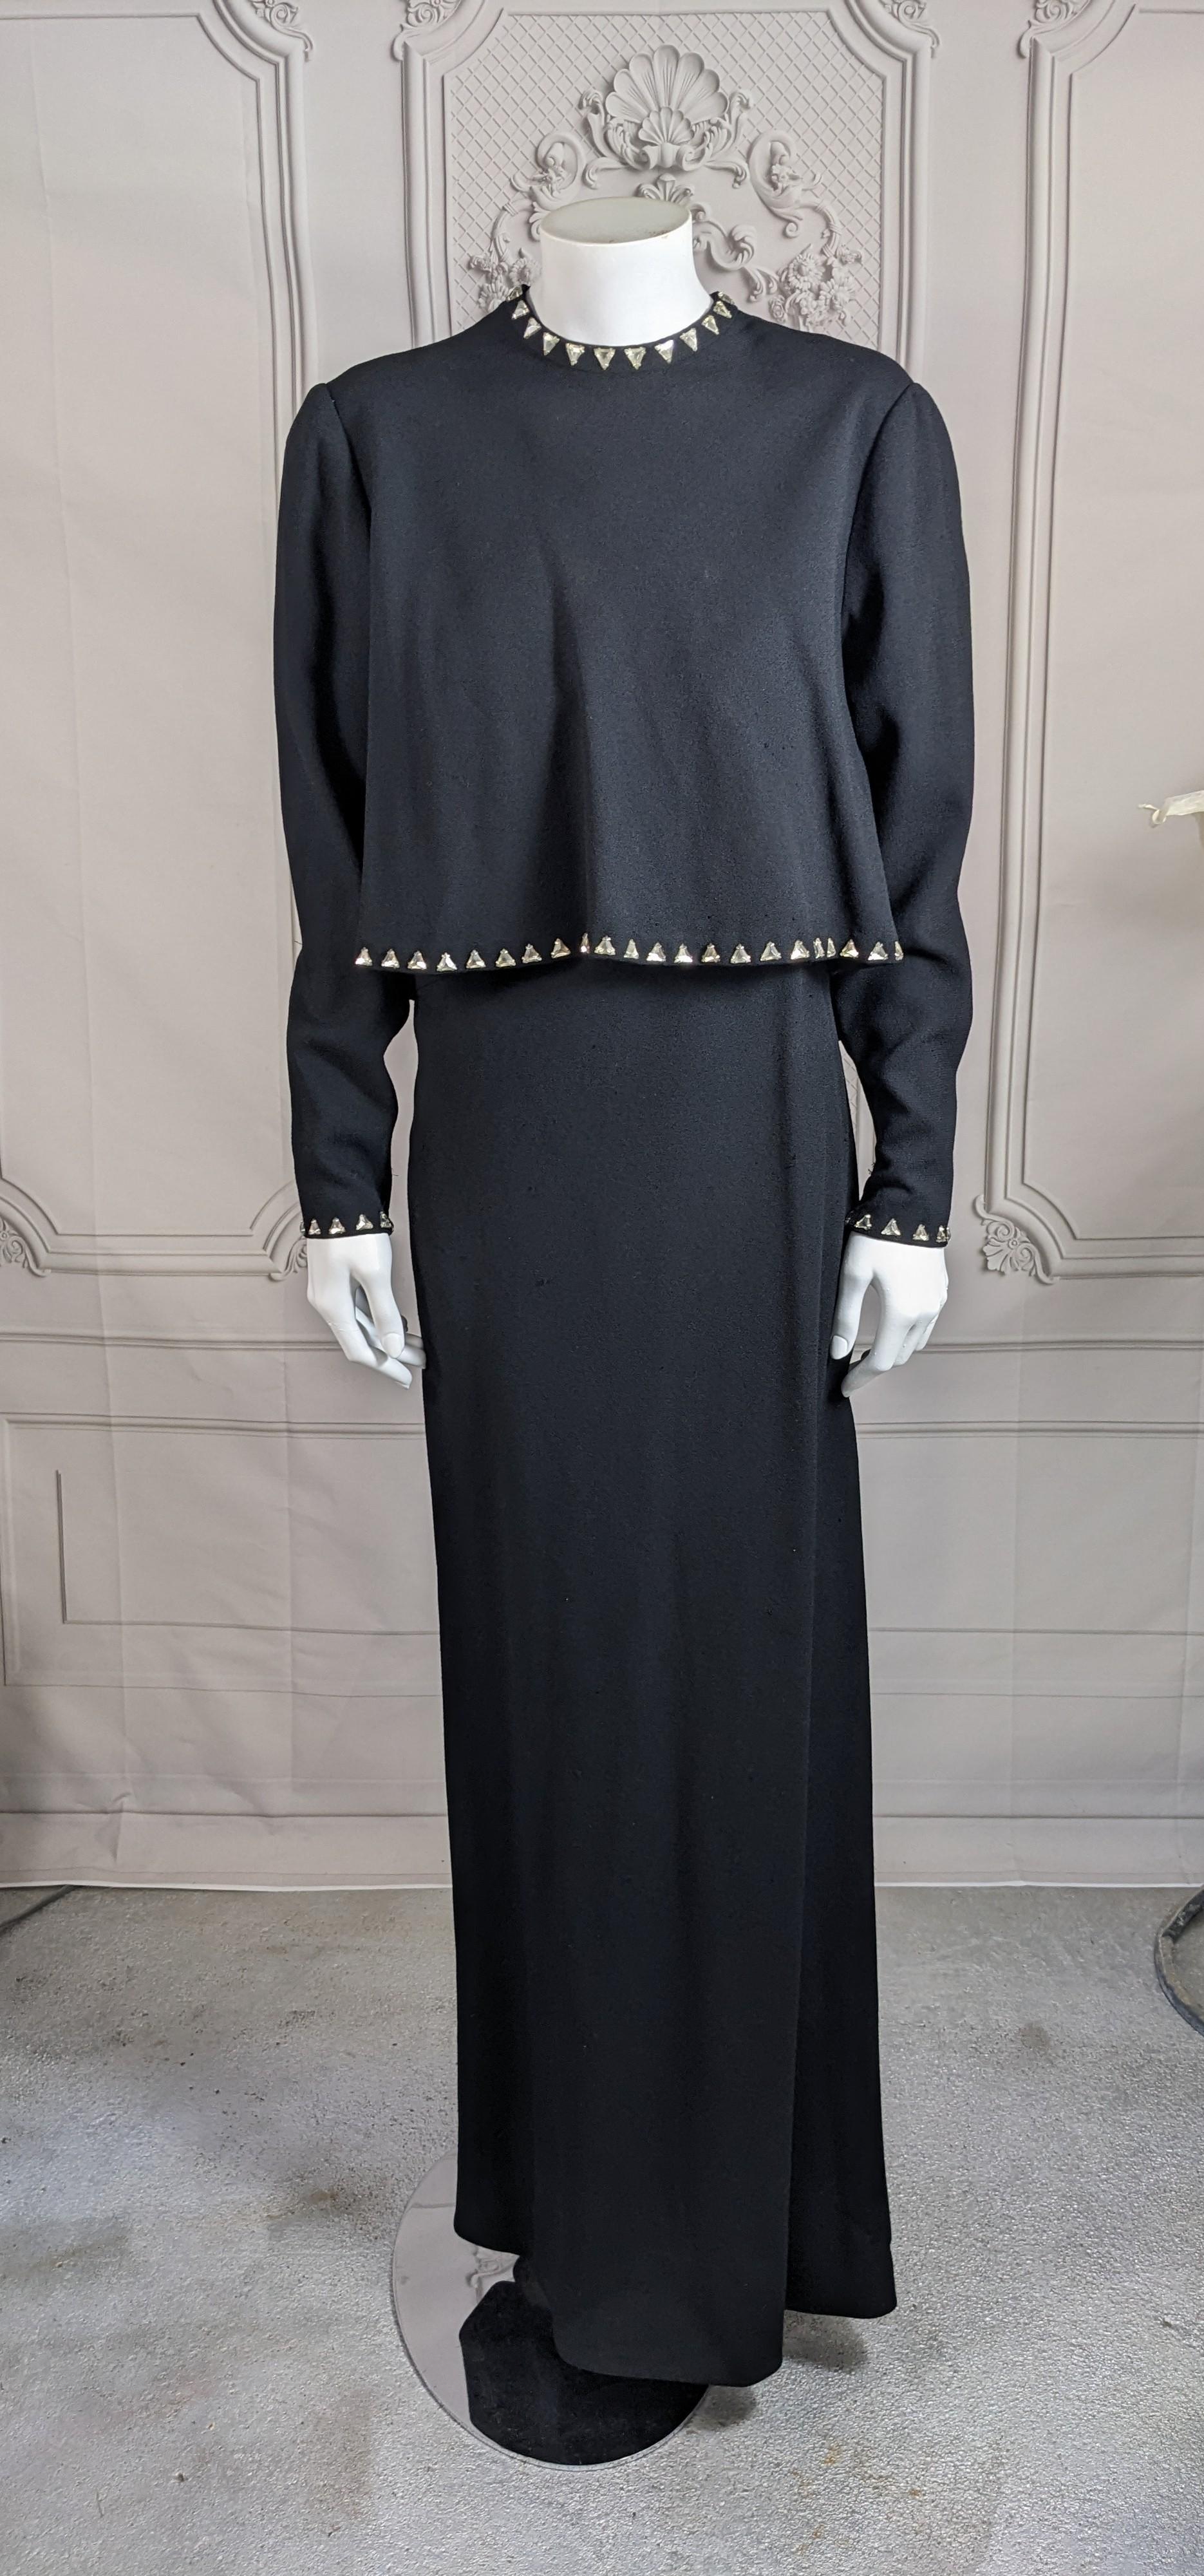 Elegant Pauline Trigere Crystal Wool Crepe Crystal Gown. 2 piece ensemble with hand set triangular crystal stone embellishment. Simple black crepe gown with side zip paired with separate over blouse studded with crystals.  Blouse is bias cut with